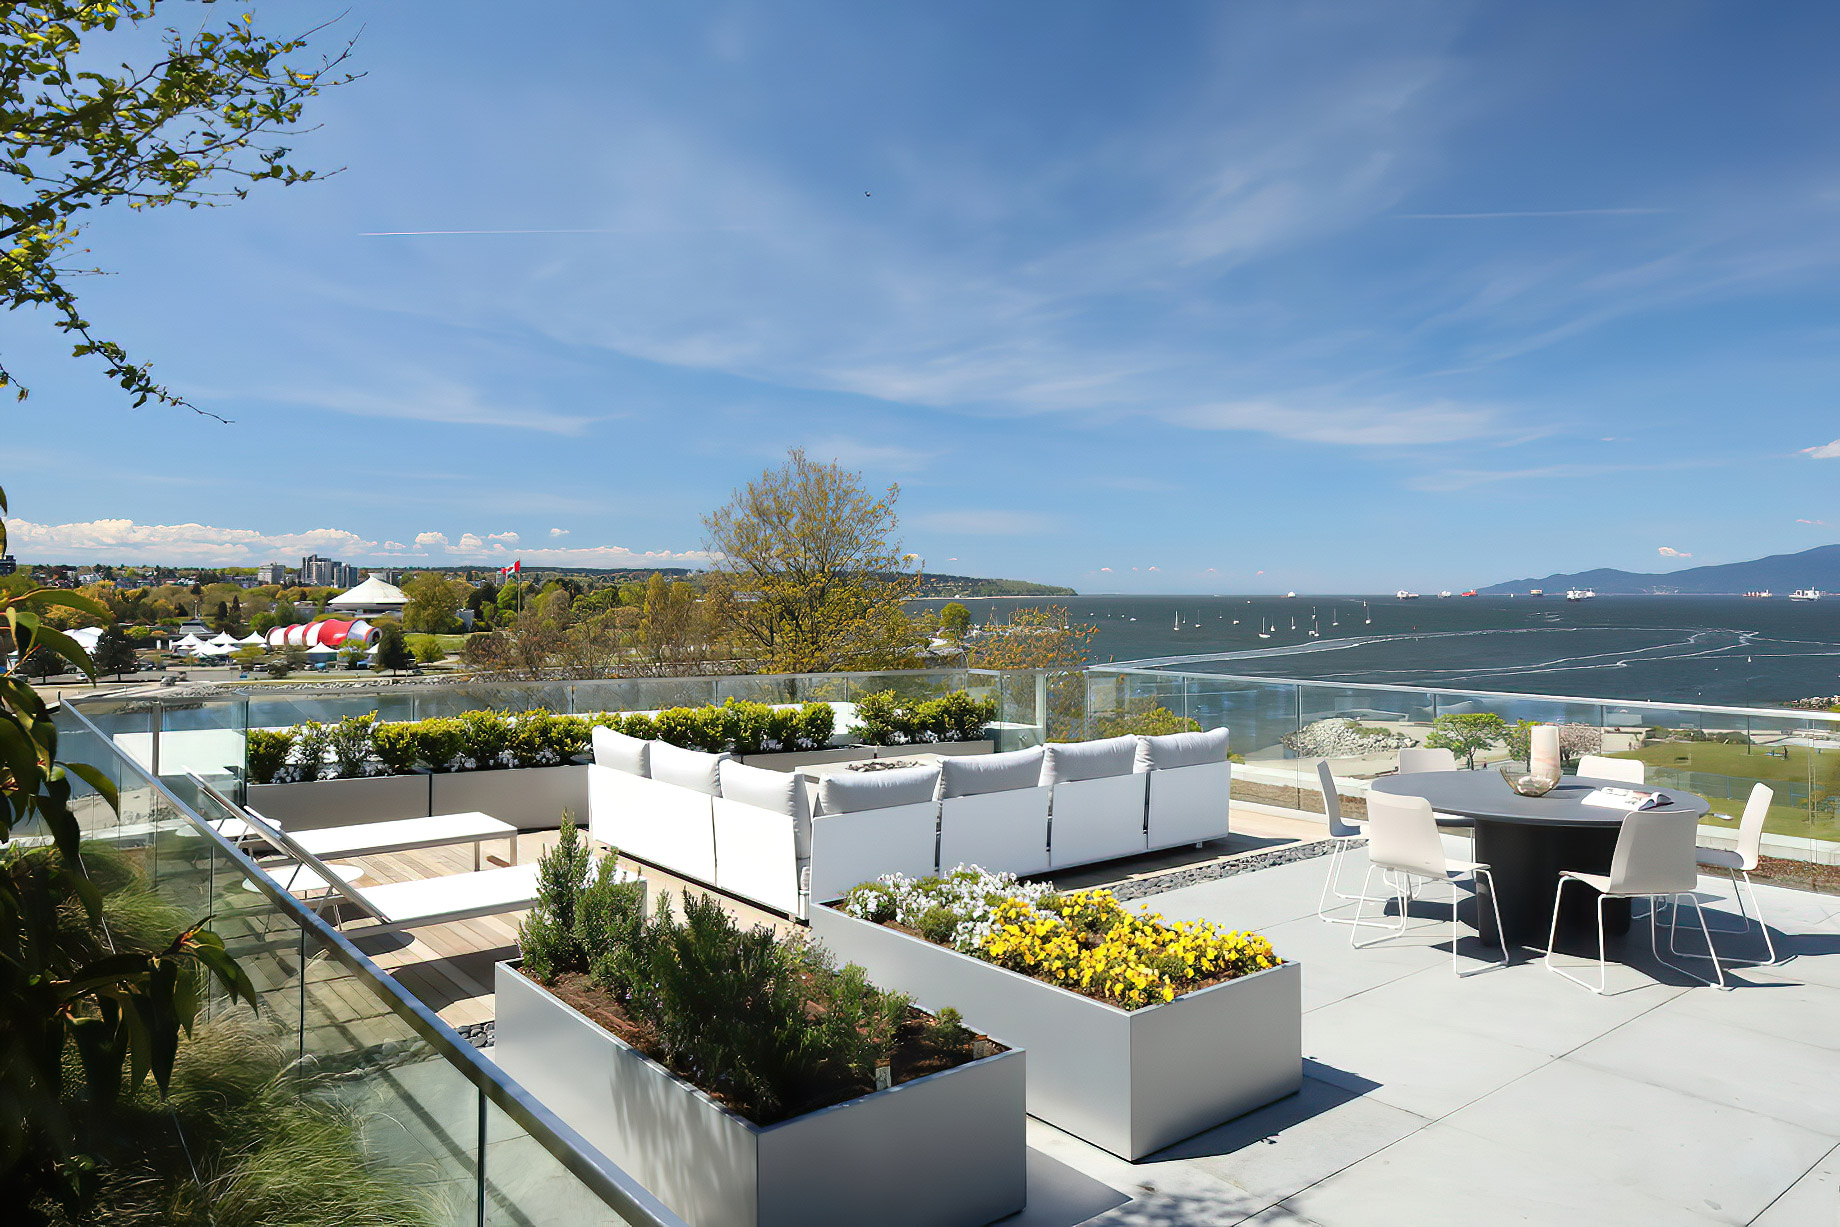 Eventide Ultra Luxury English Bay Homes – Bute St, Vancouver, BC, Canada – Aerial Rooftop Deck English Bay View